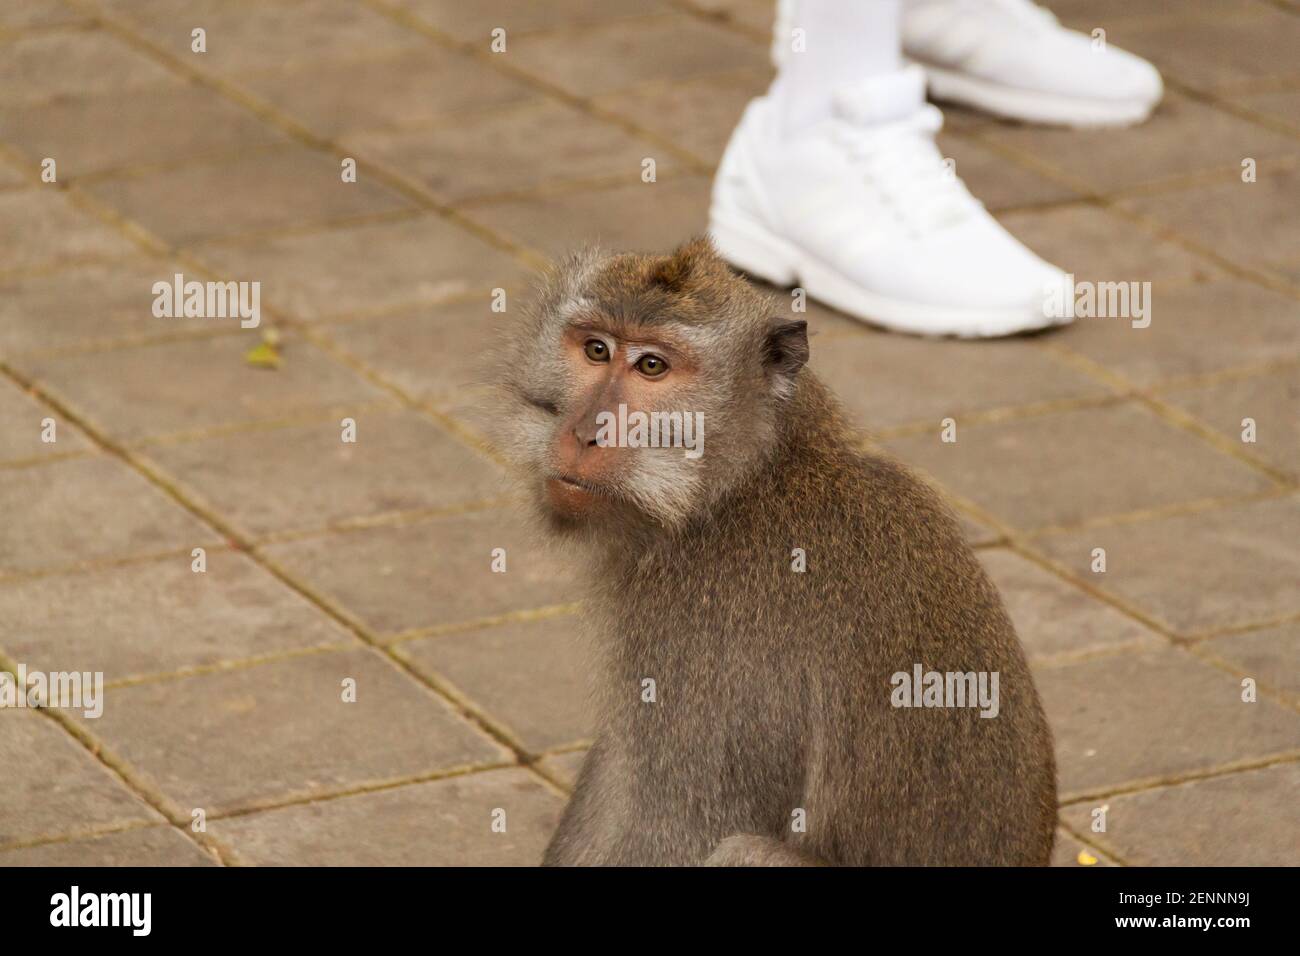 A long-tailed macaque (macaca fascicularis) and a pair of white shoes of a tourist in the background at Sacred Monkey Forest, Bali Stock Photo